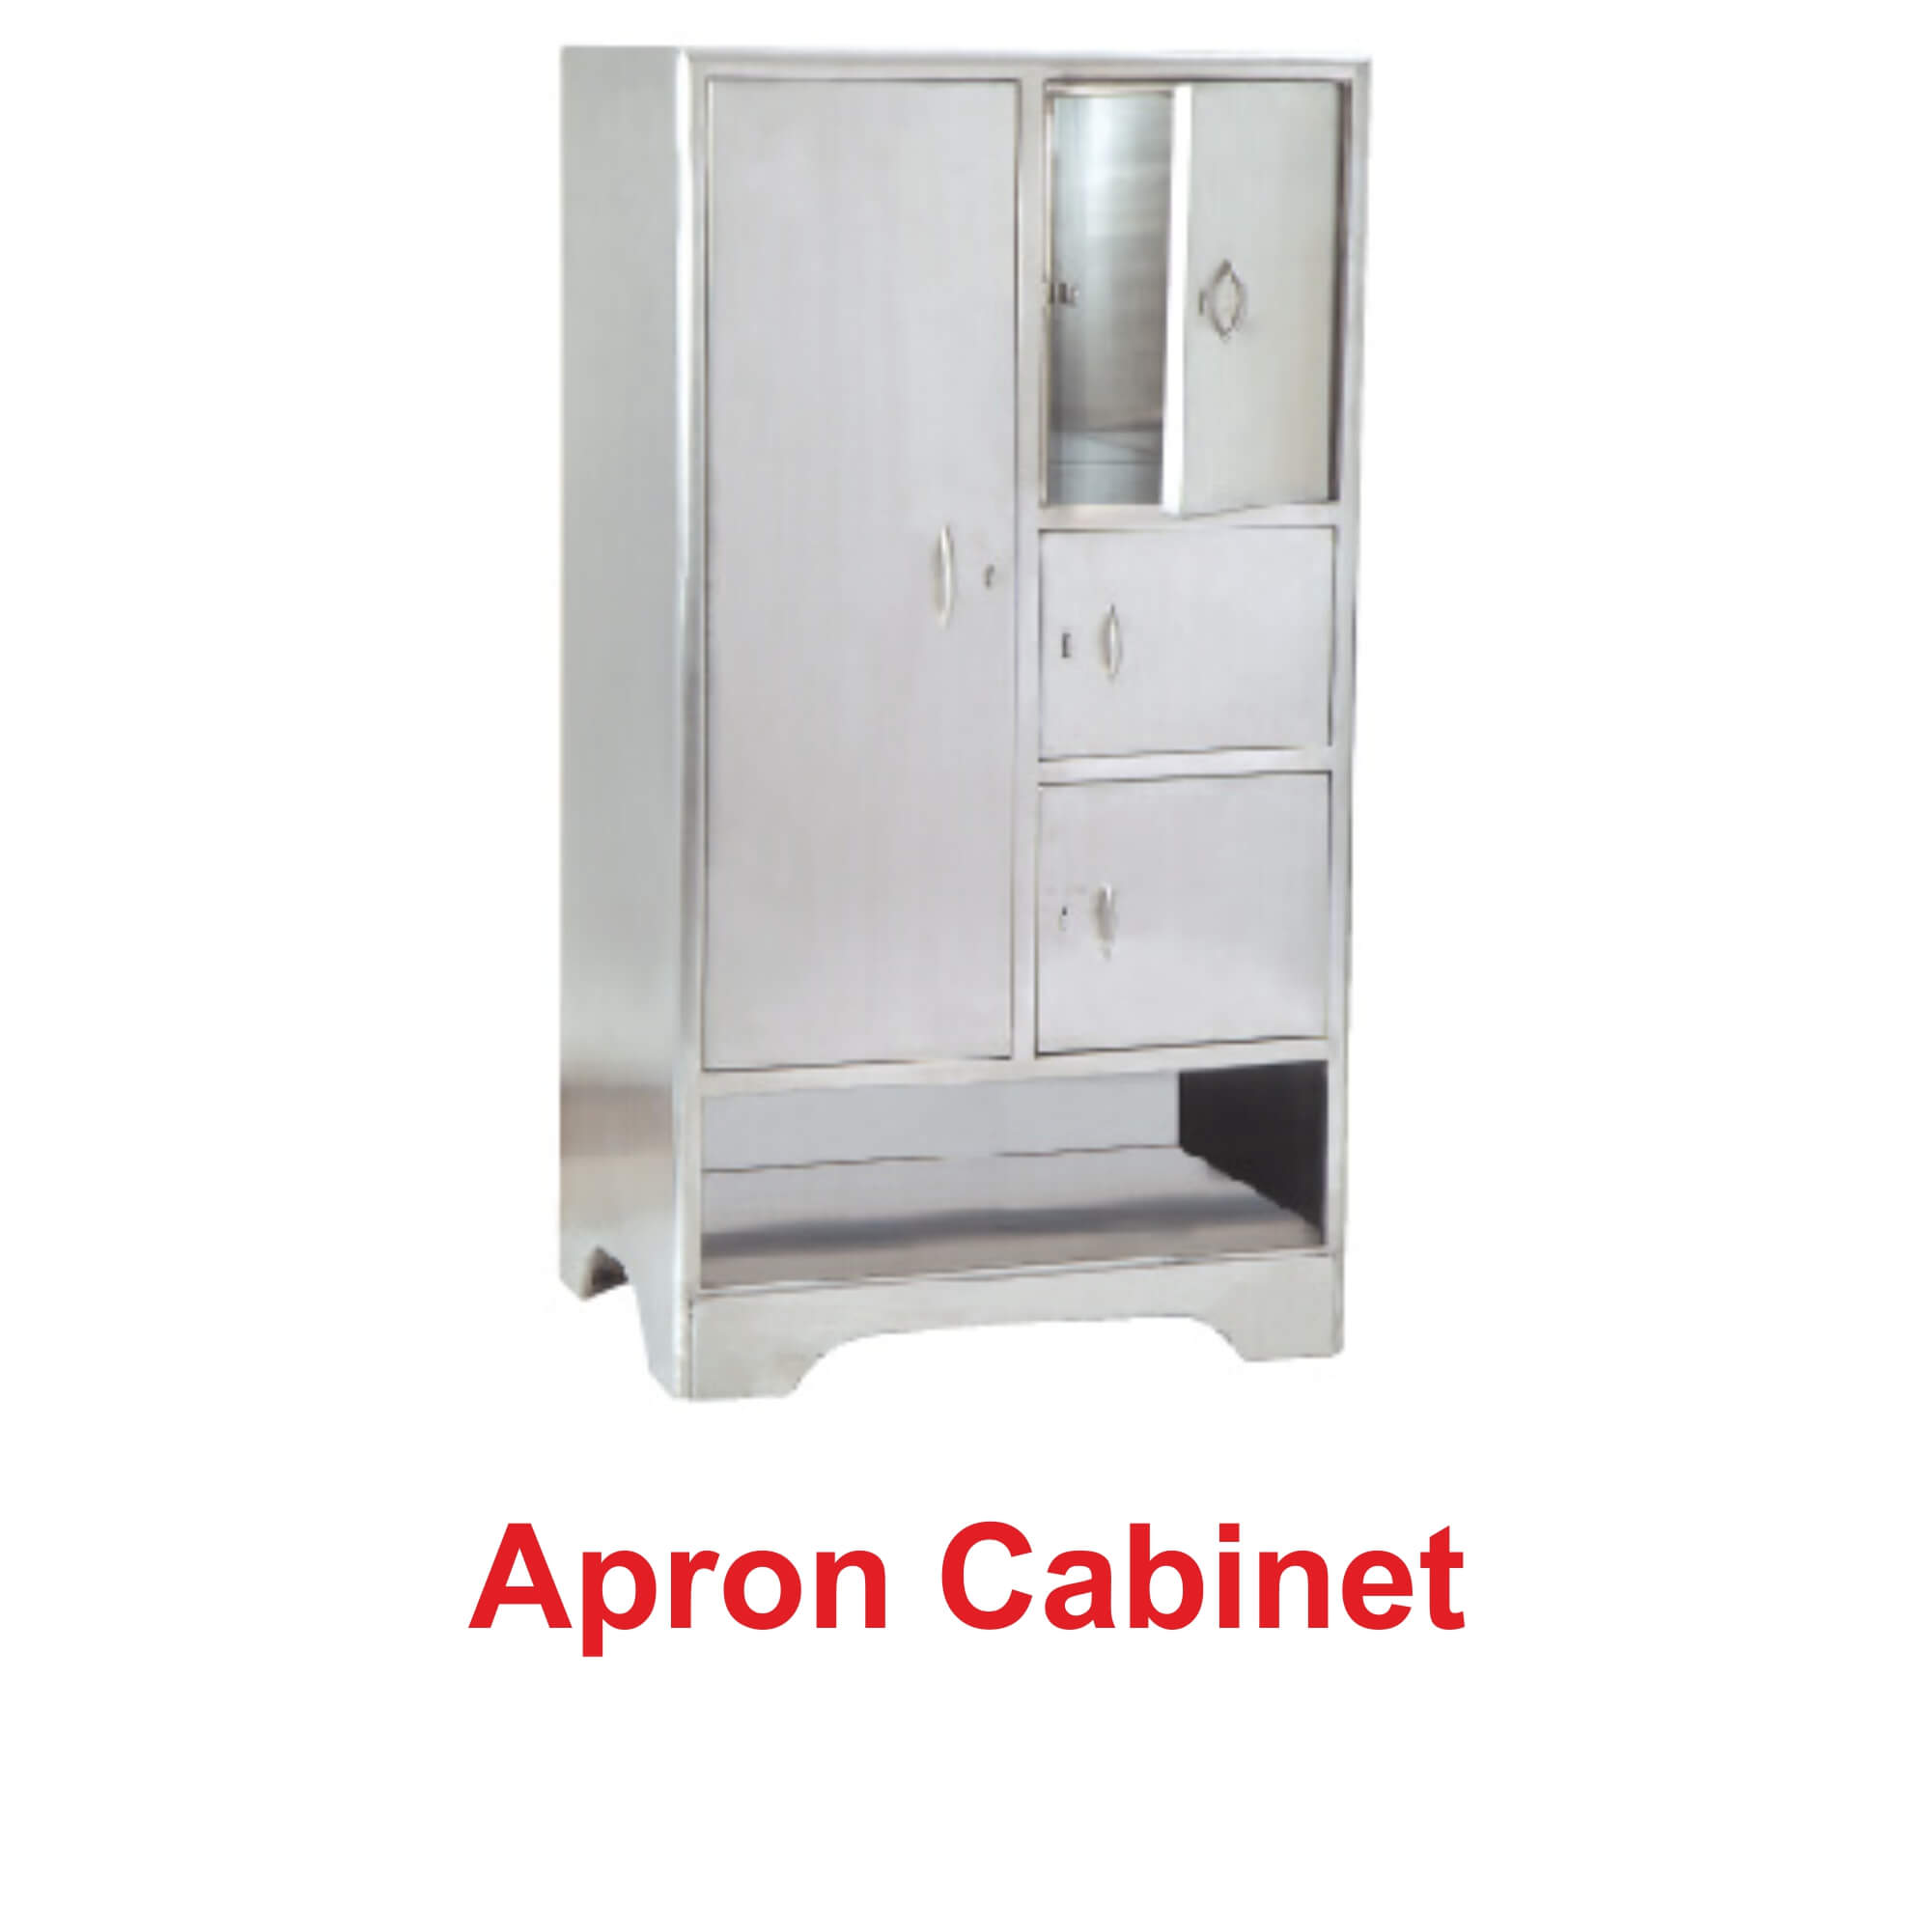 Apron Cabinet Manufacturer in India